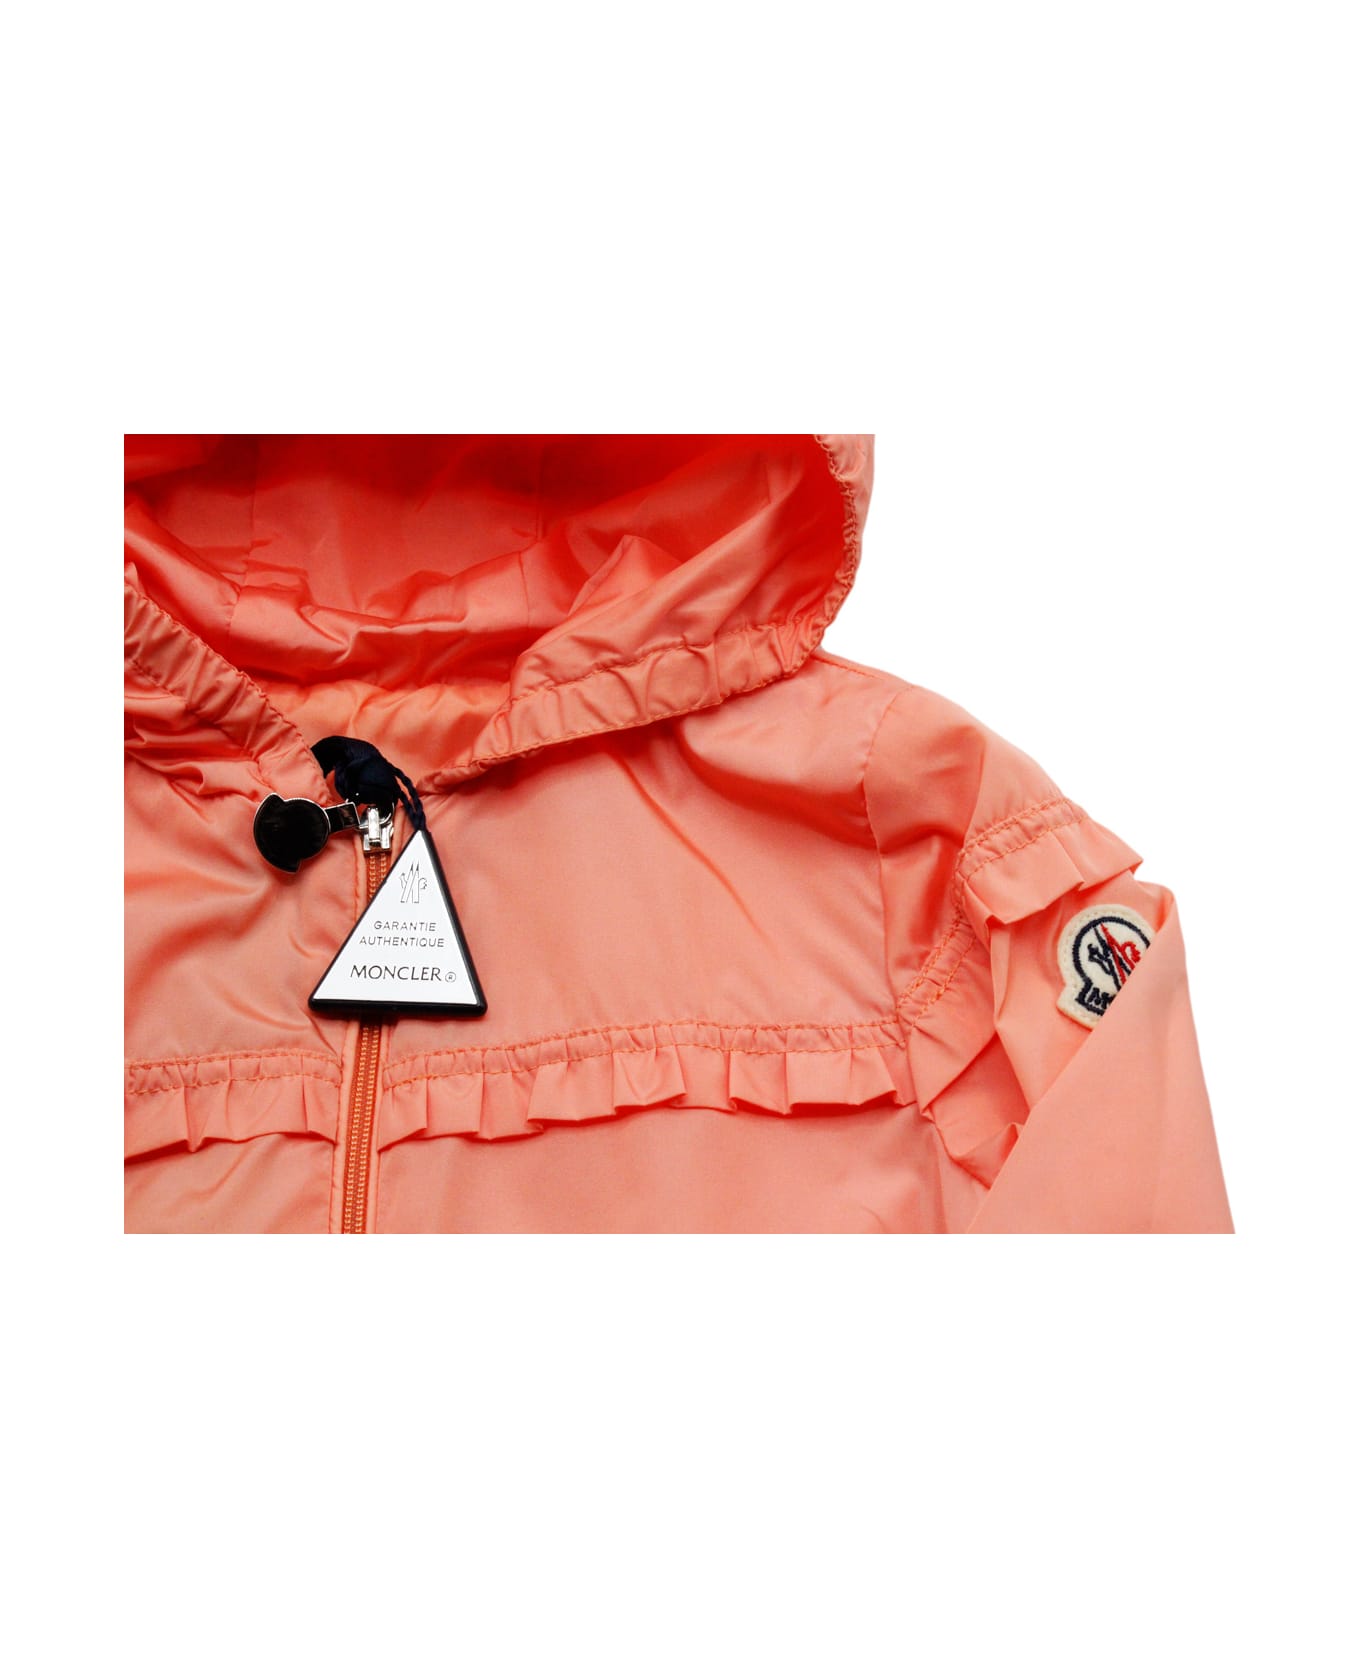 Moncler Hiti Jacket In Light Nylon With Hood, Embellished With Ruffles And Zip Closure. - Orange